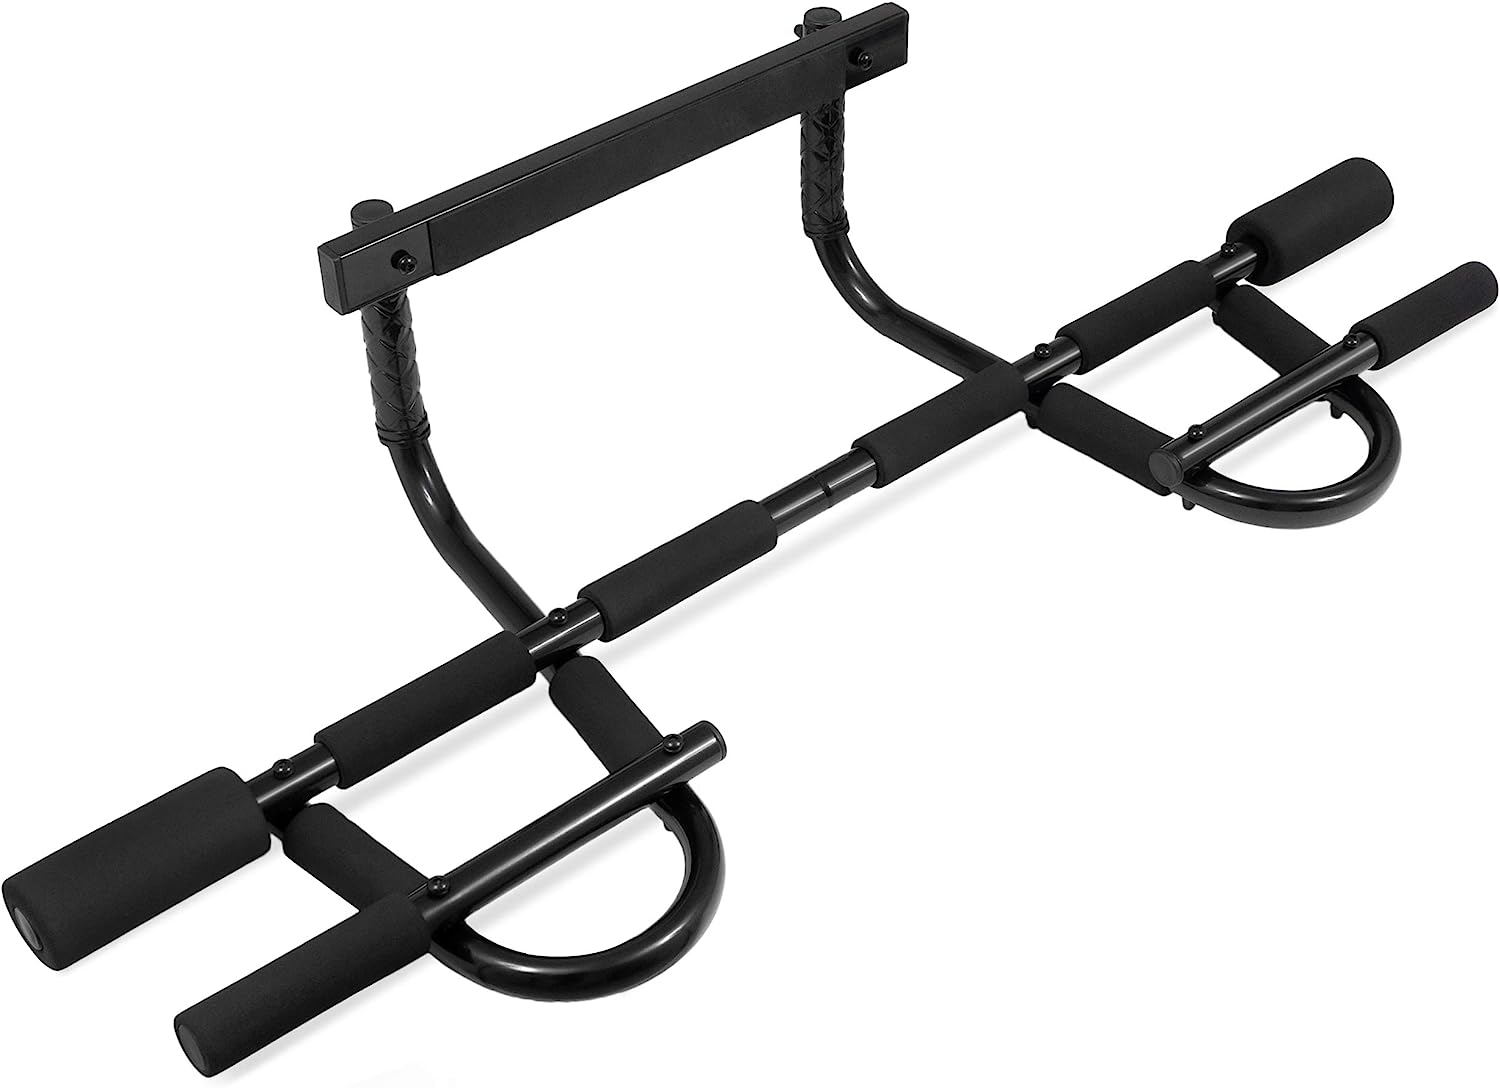 ProsourceFit Multi-Grip Lite Pull Up/Chin Up Bar, [...]